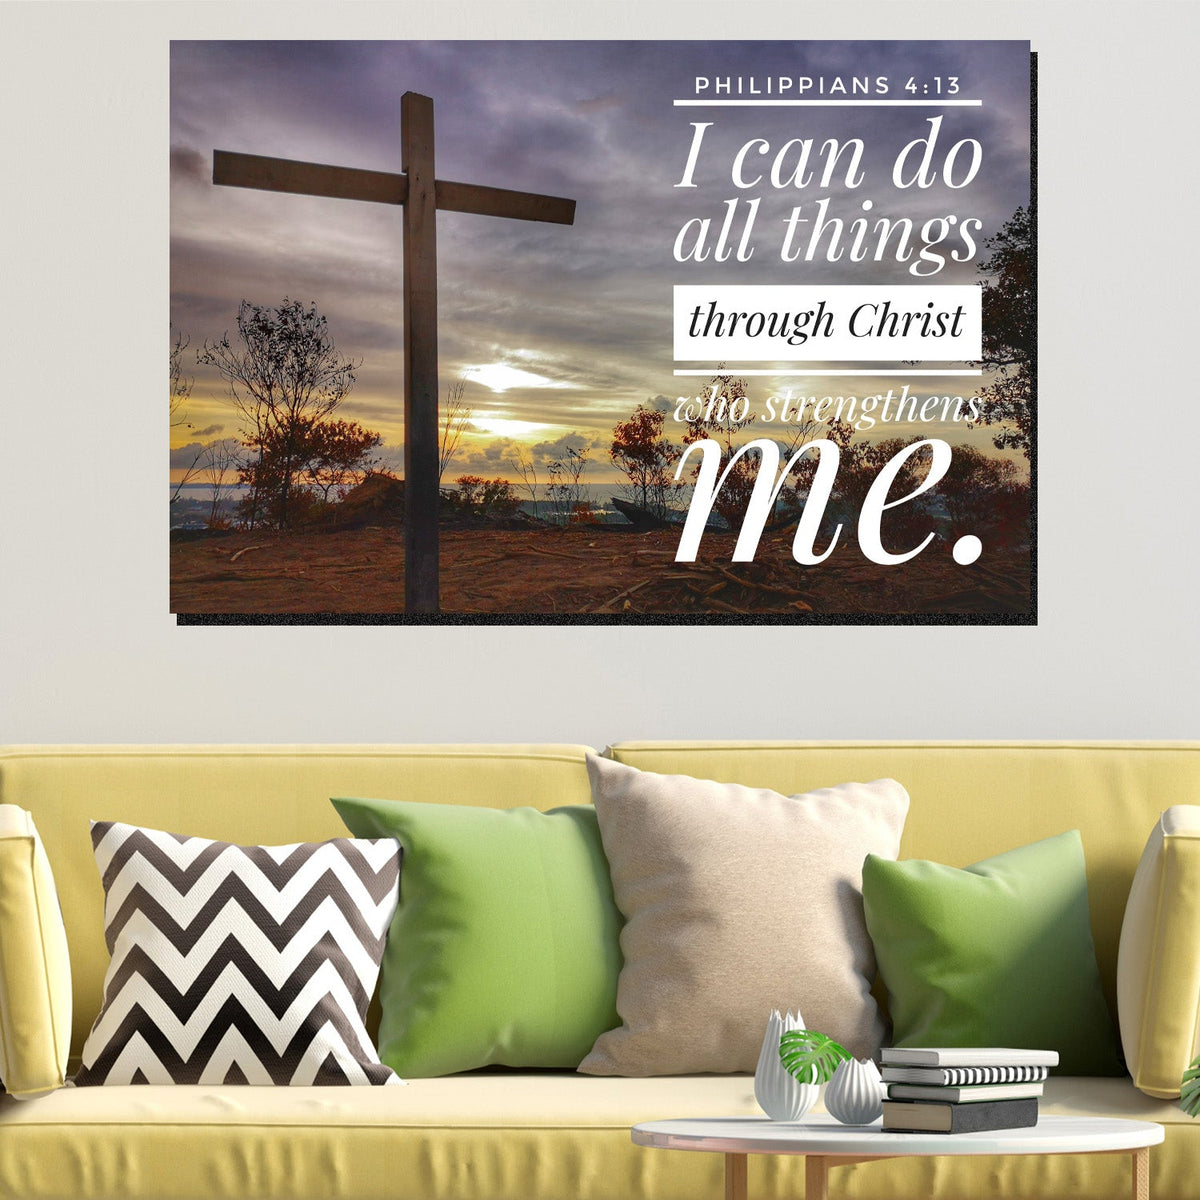 https://cdn.shopify.com/s/files/1/0387/9986/8044/products/BibleQuotePhilippians4_13CanvasArtprintStretched-1.jpg